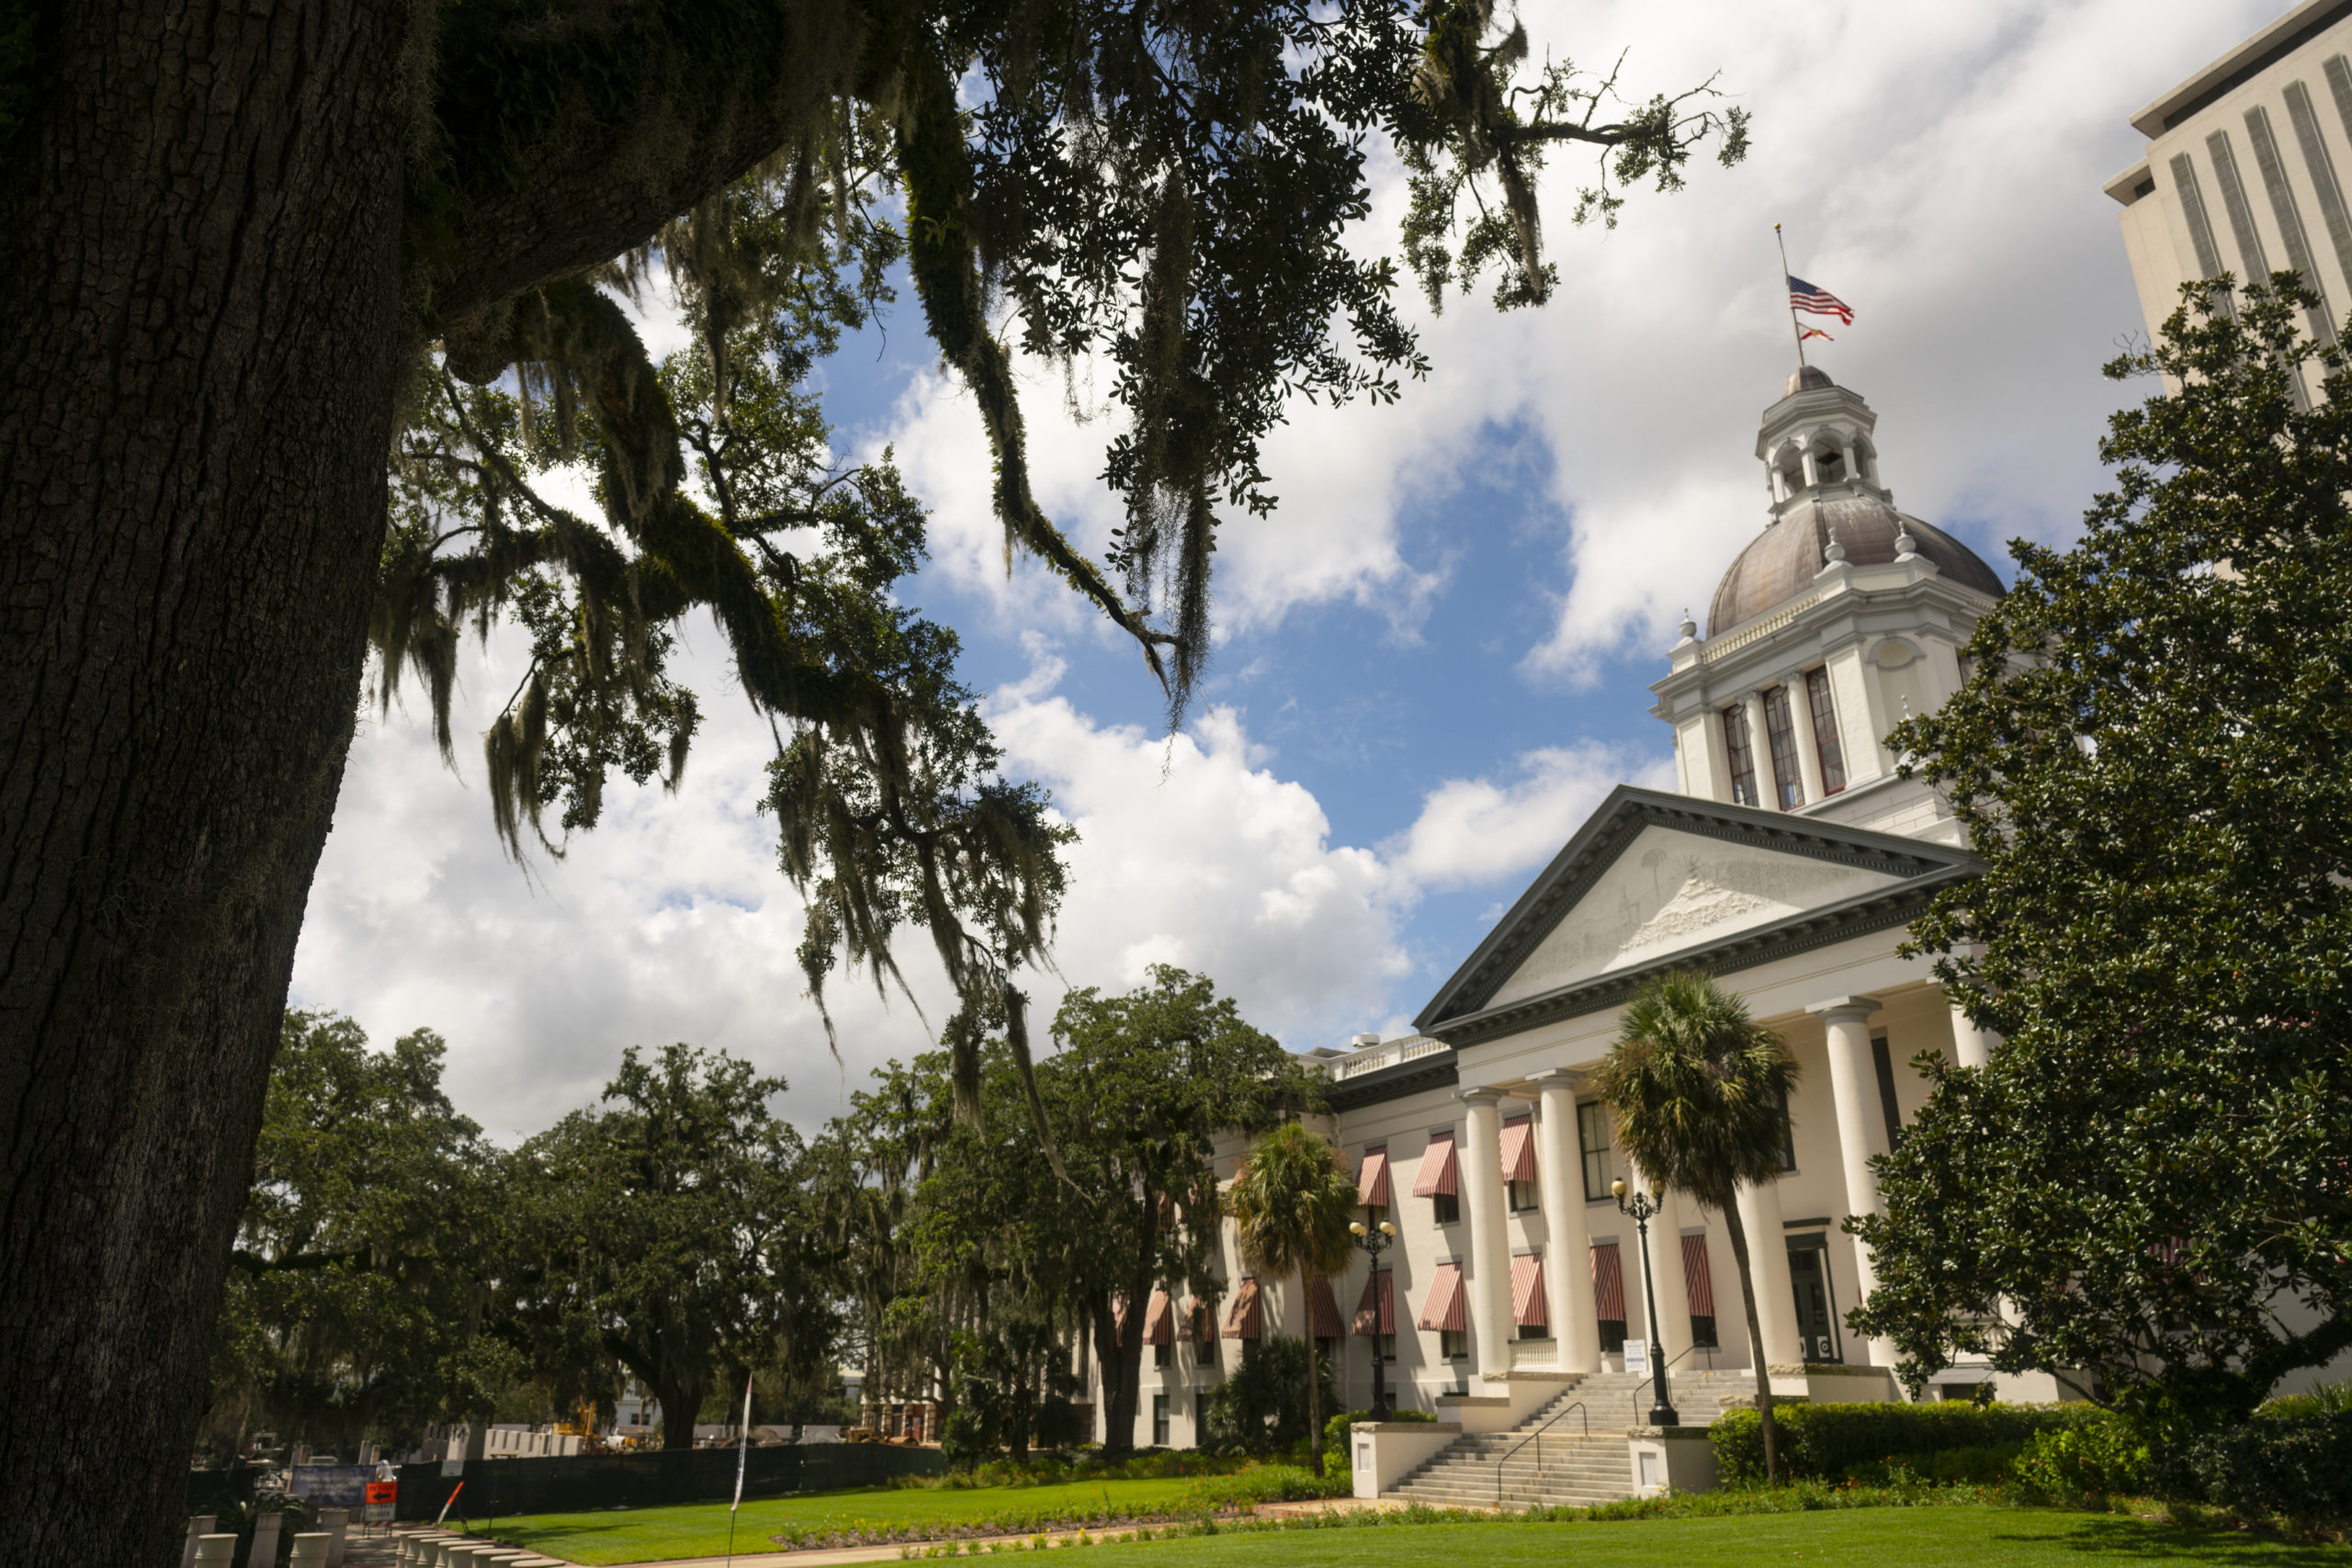 Instead of Boasting, Florida Should Be Bracing for Bad Pension News and More Debt